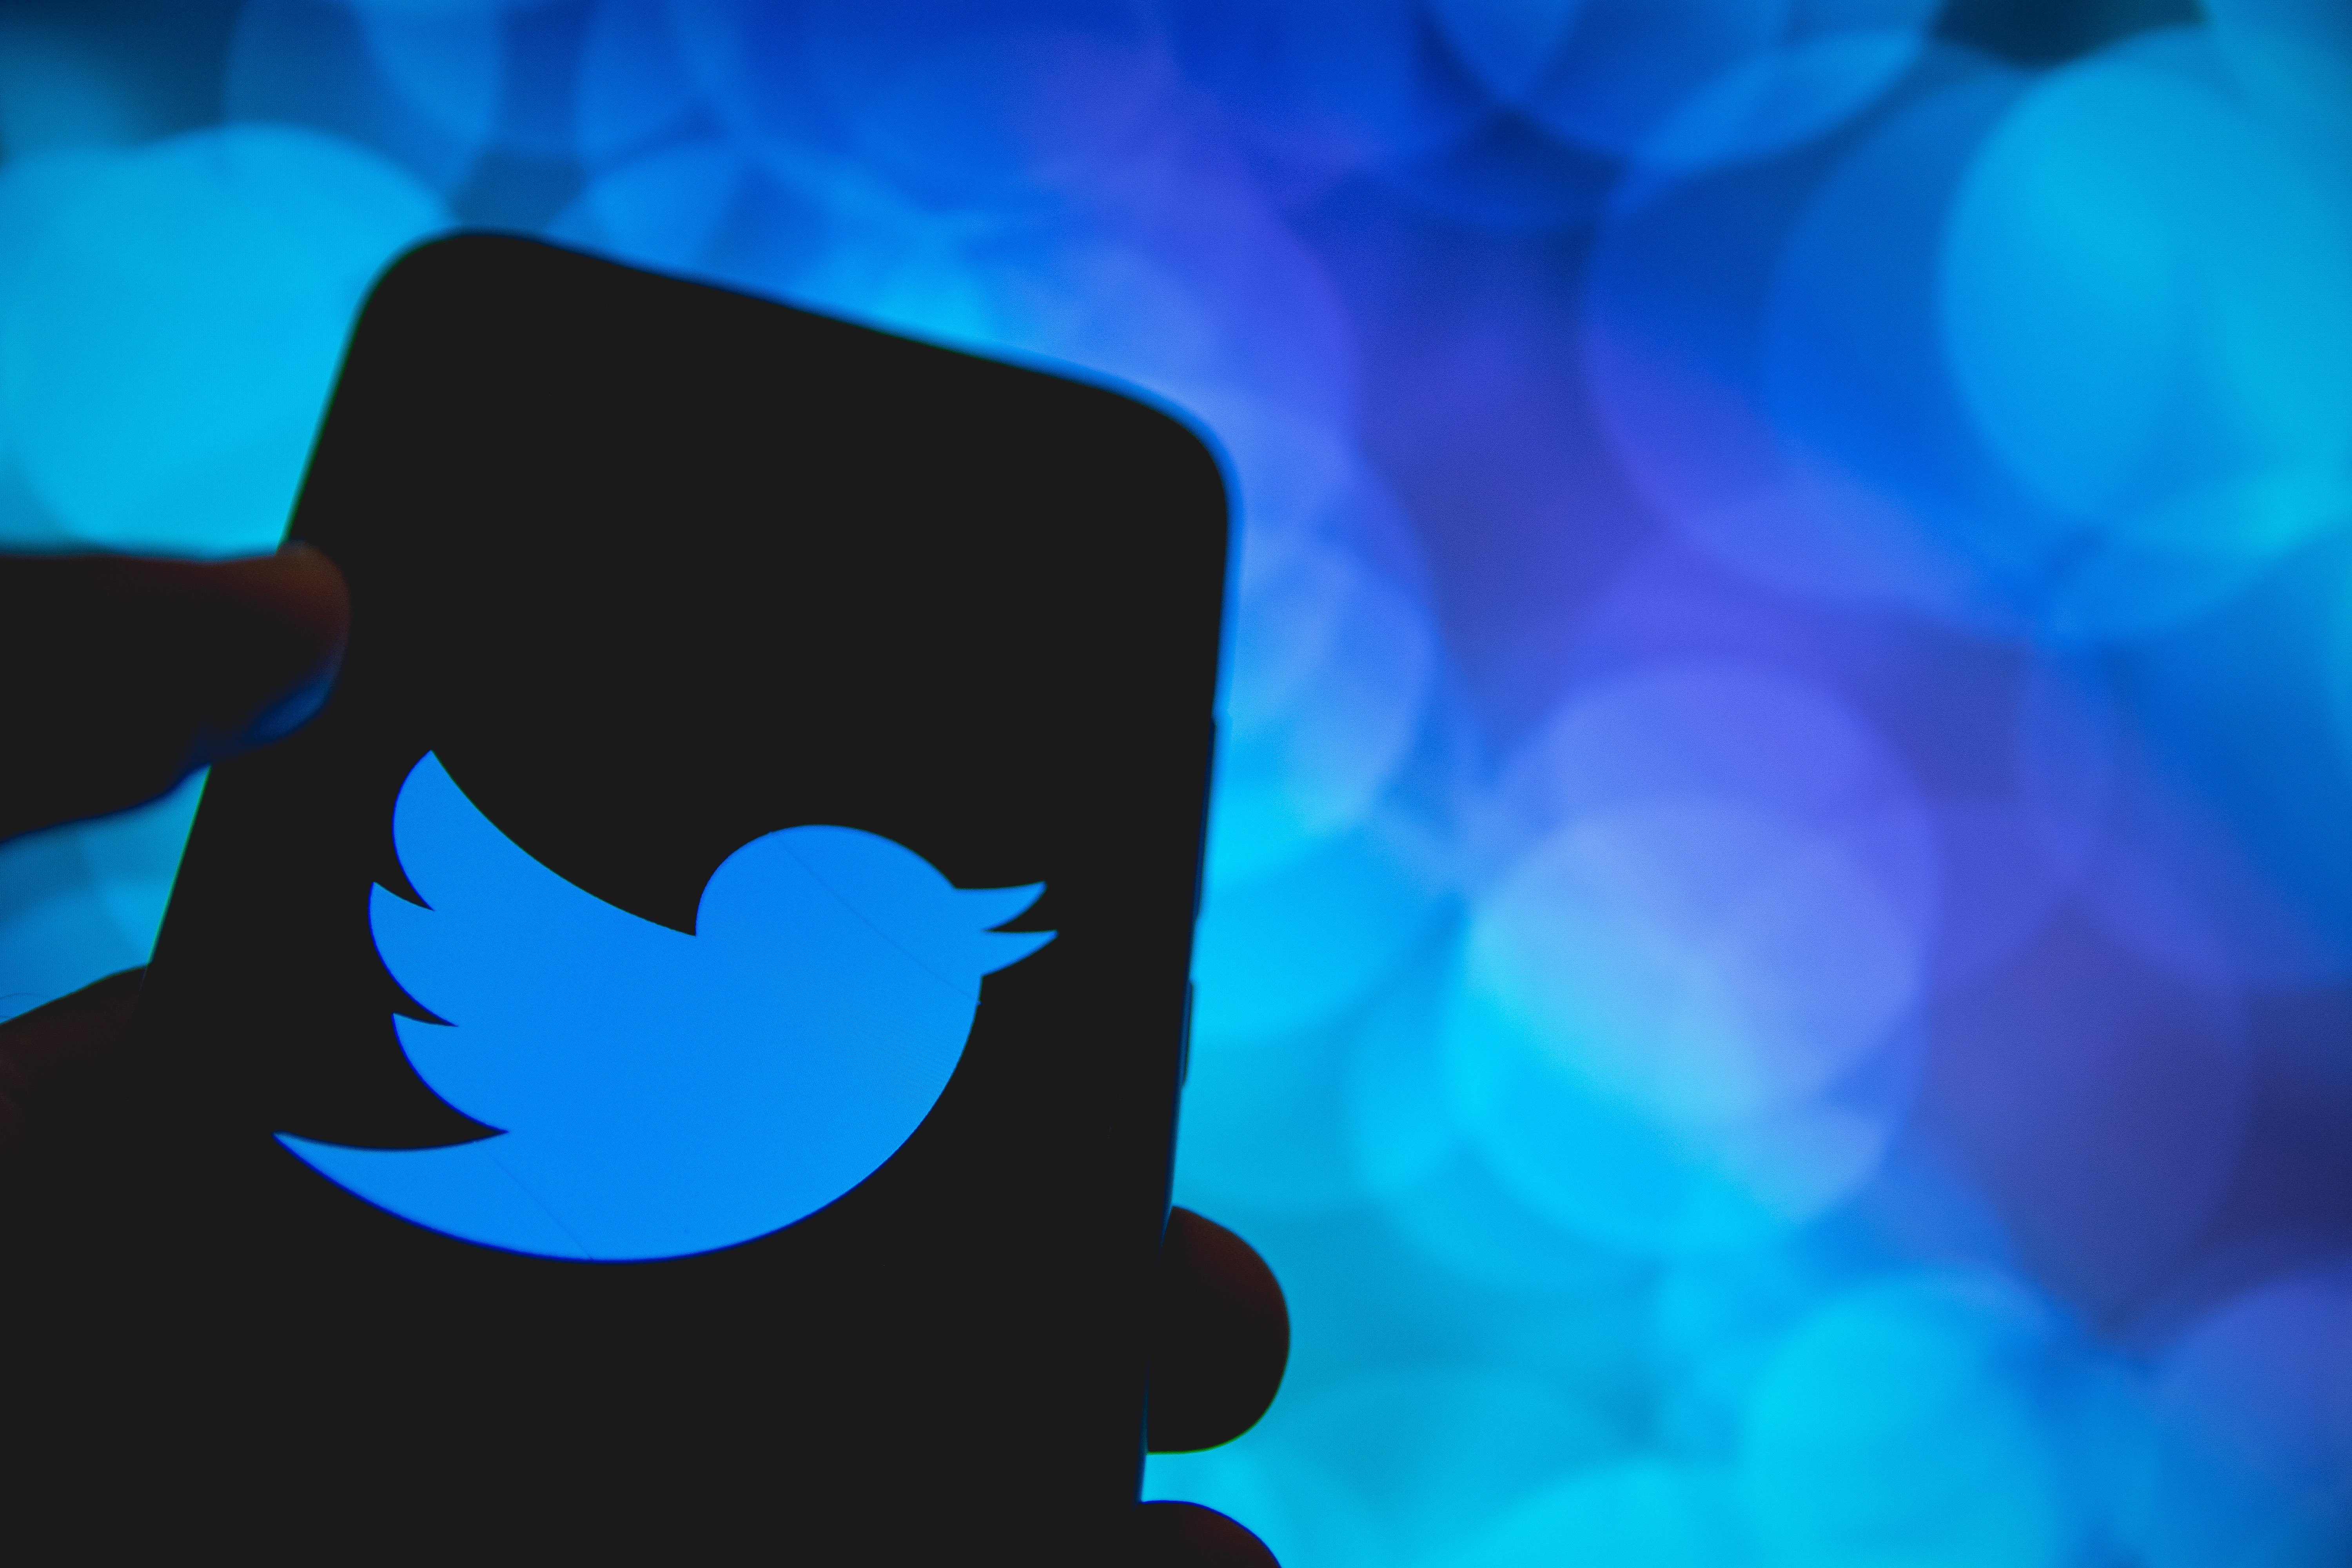 photo illustration Twitter logo is displayed on a smartphone screen